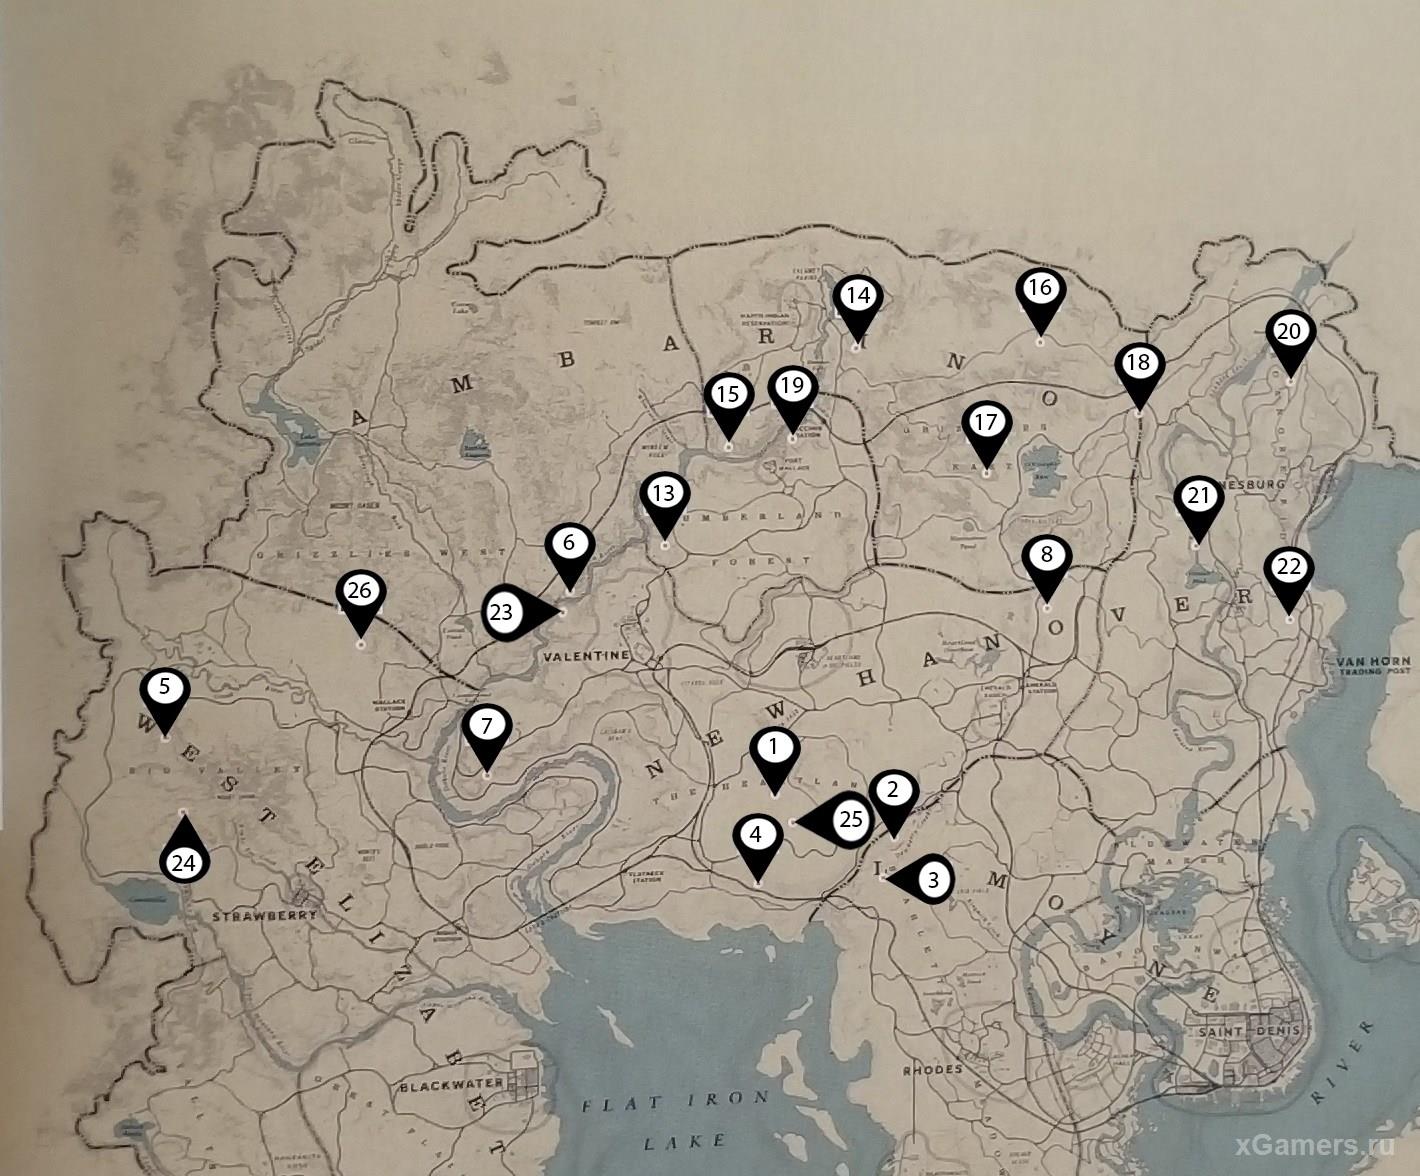 A complete map of the location of the remains of the bones in the game RDR 2